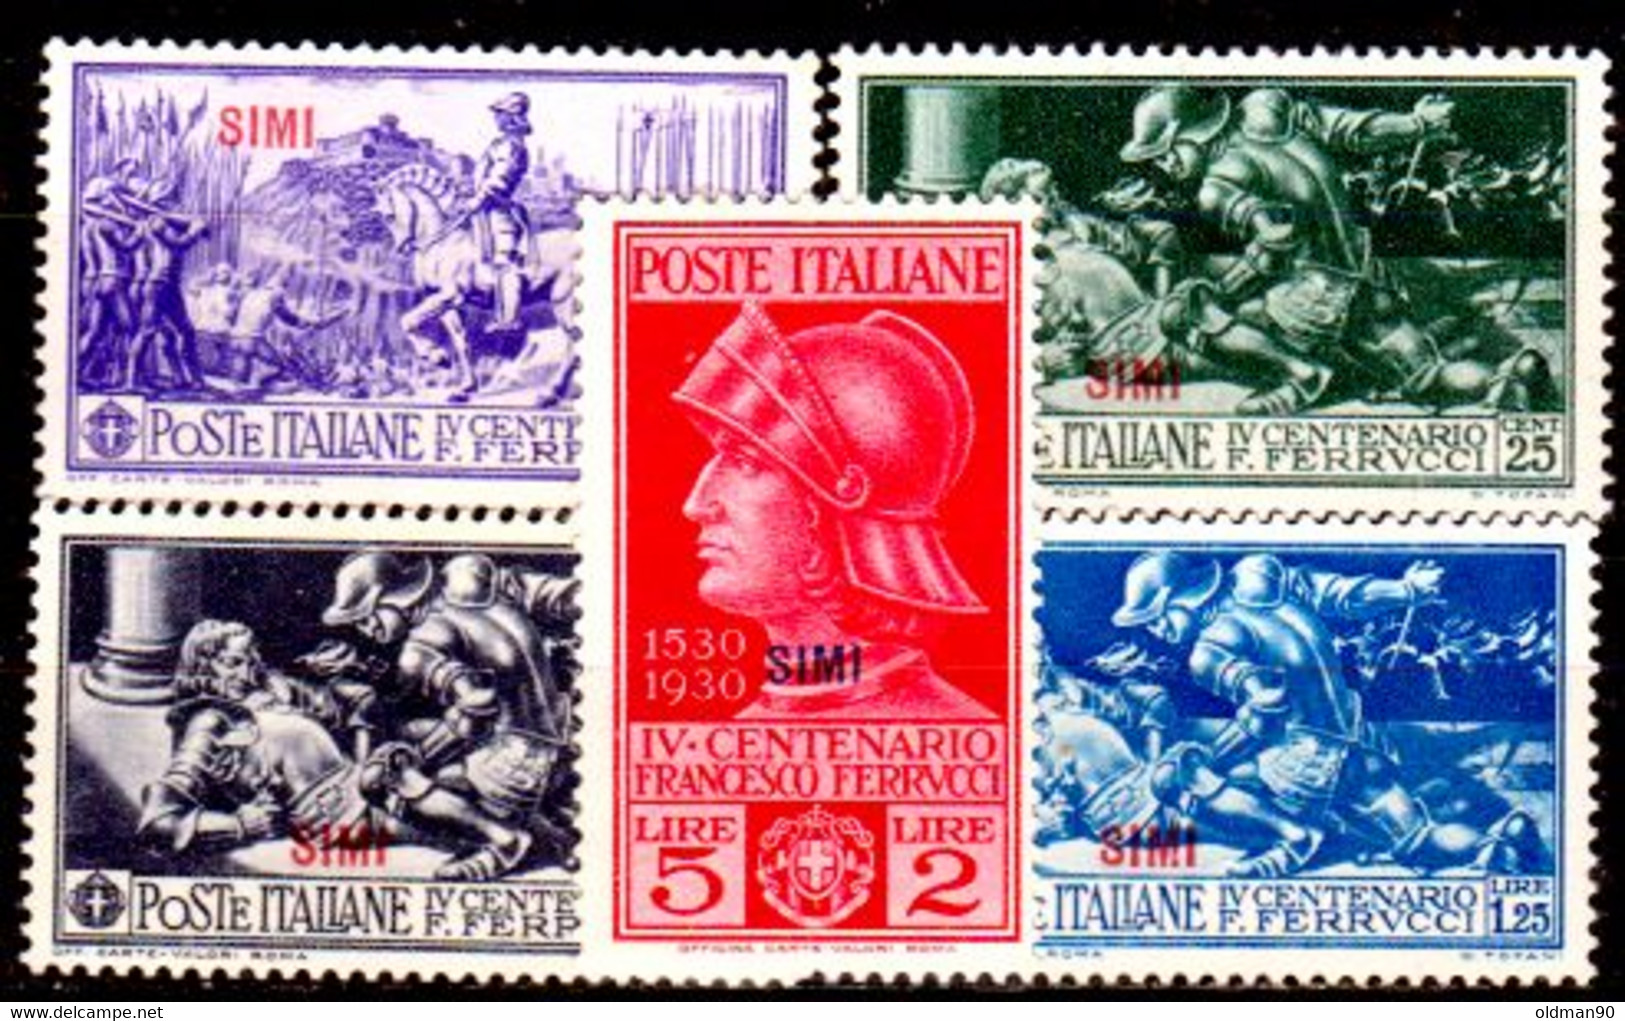 Egeo-OS-352- Simi: Original Stamps And Overprint 1930 (++) MNH - Quality In Your Opinion. - Aegean (Simi)